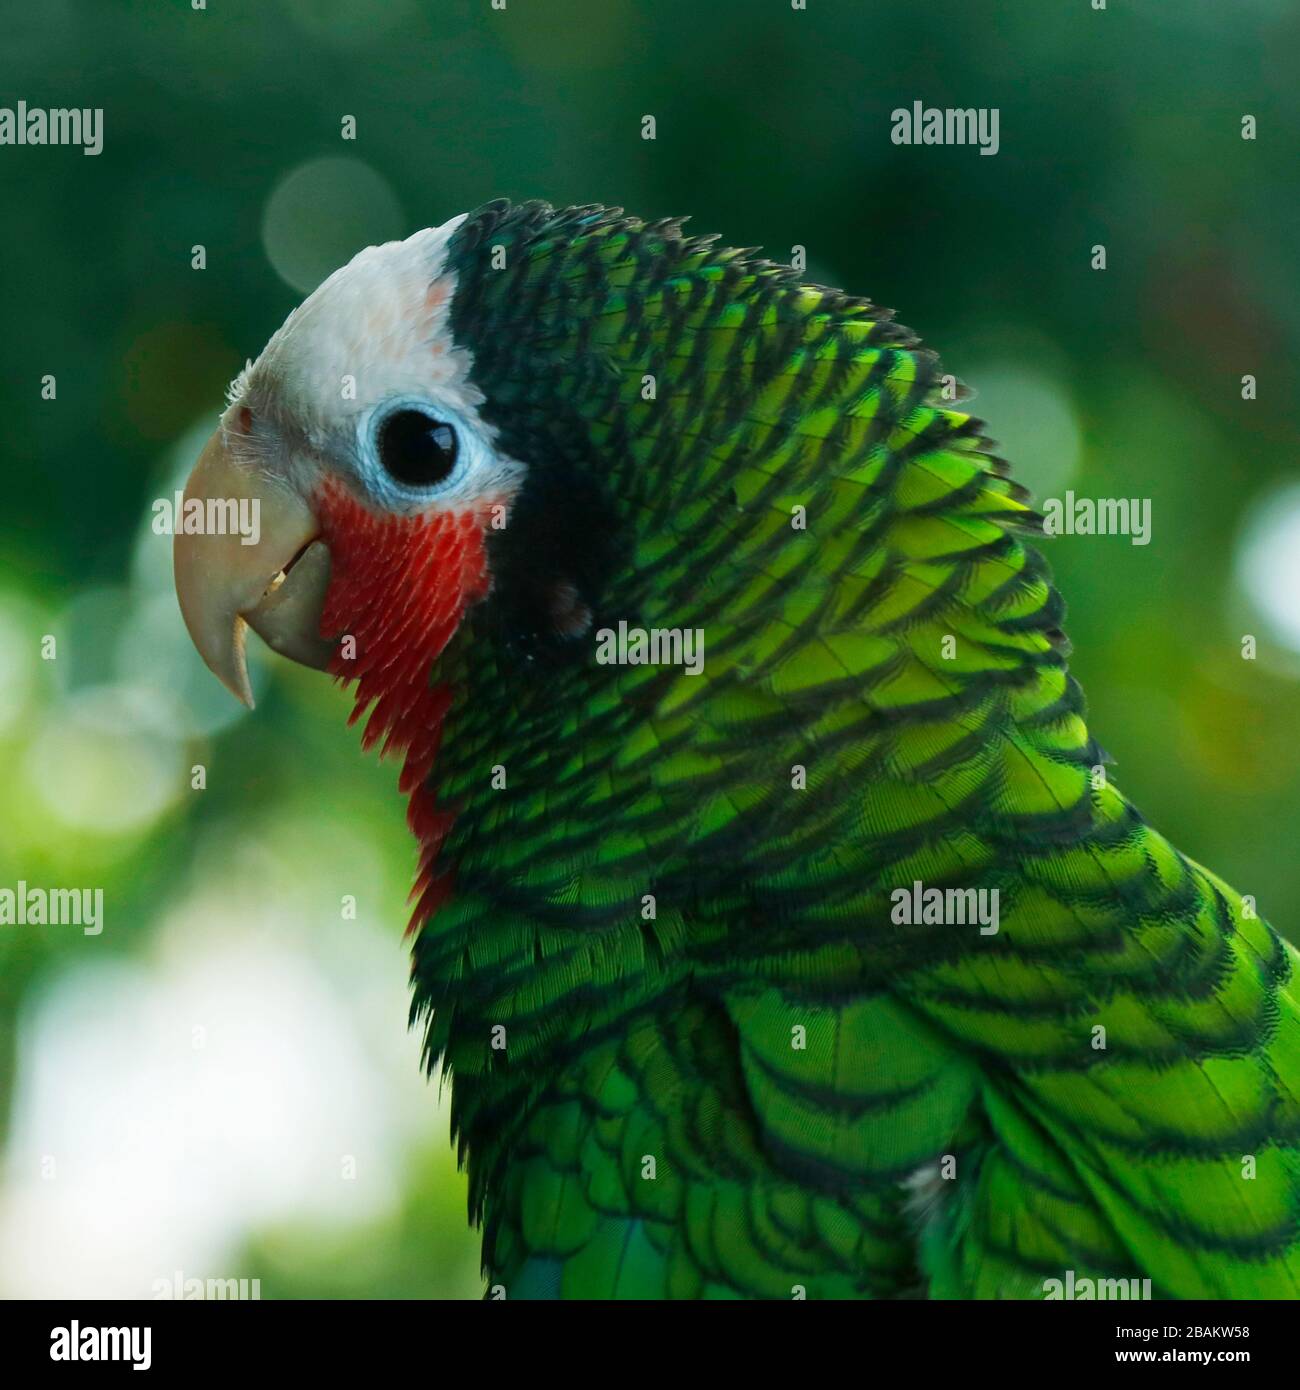 rose-throated amazon parrot in close up Stock Photo